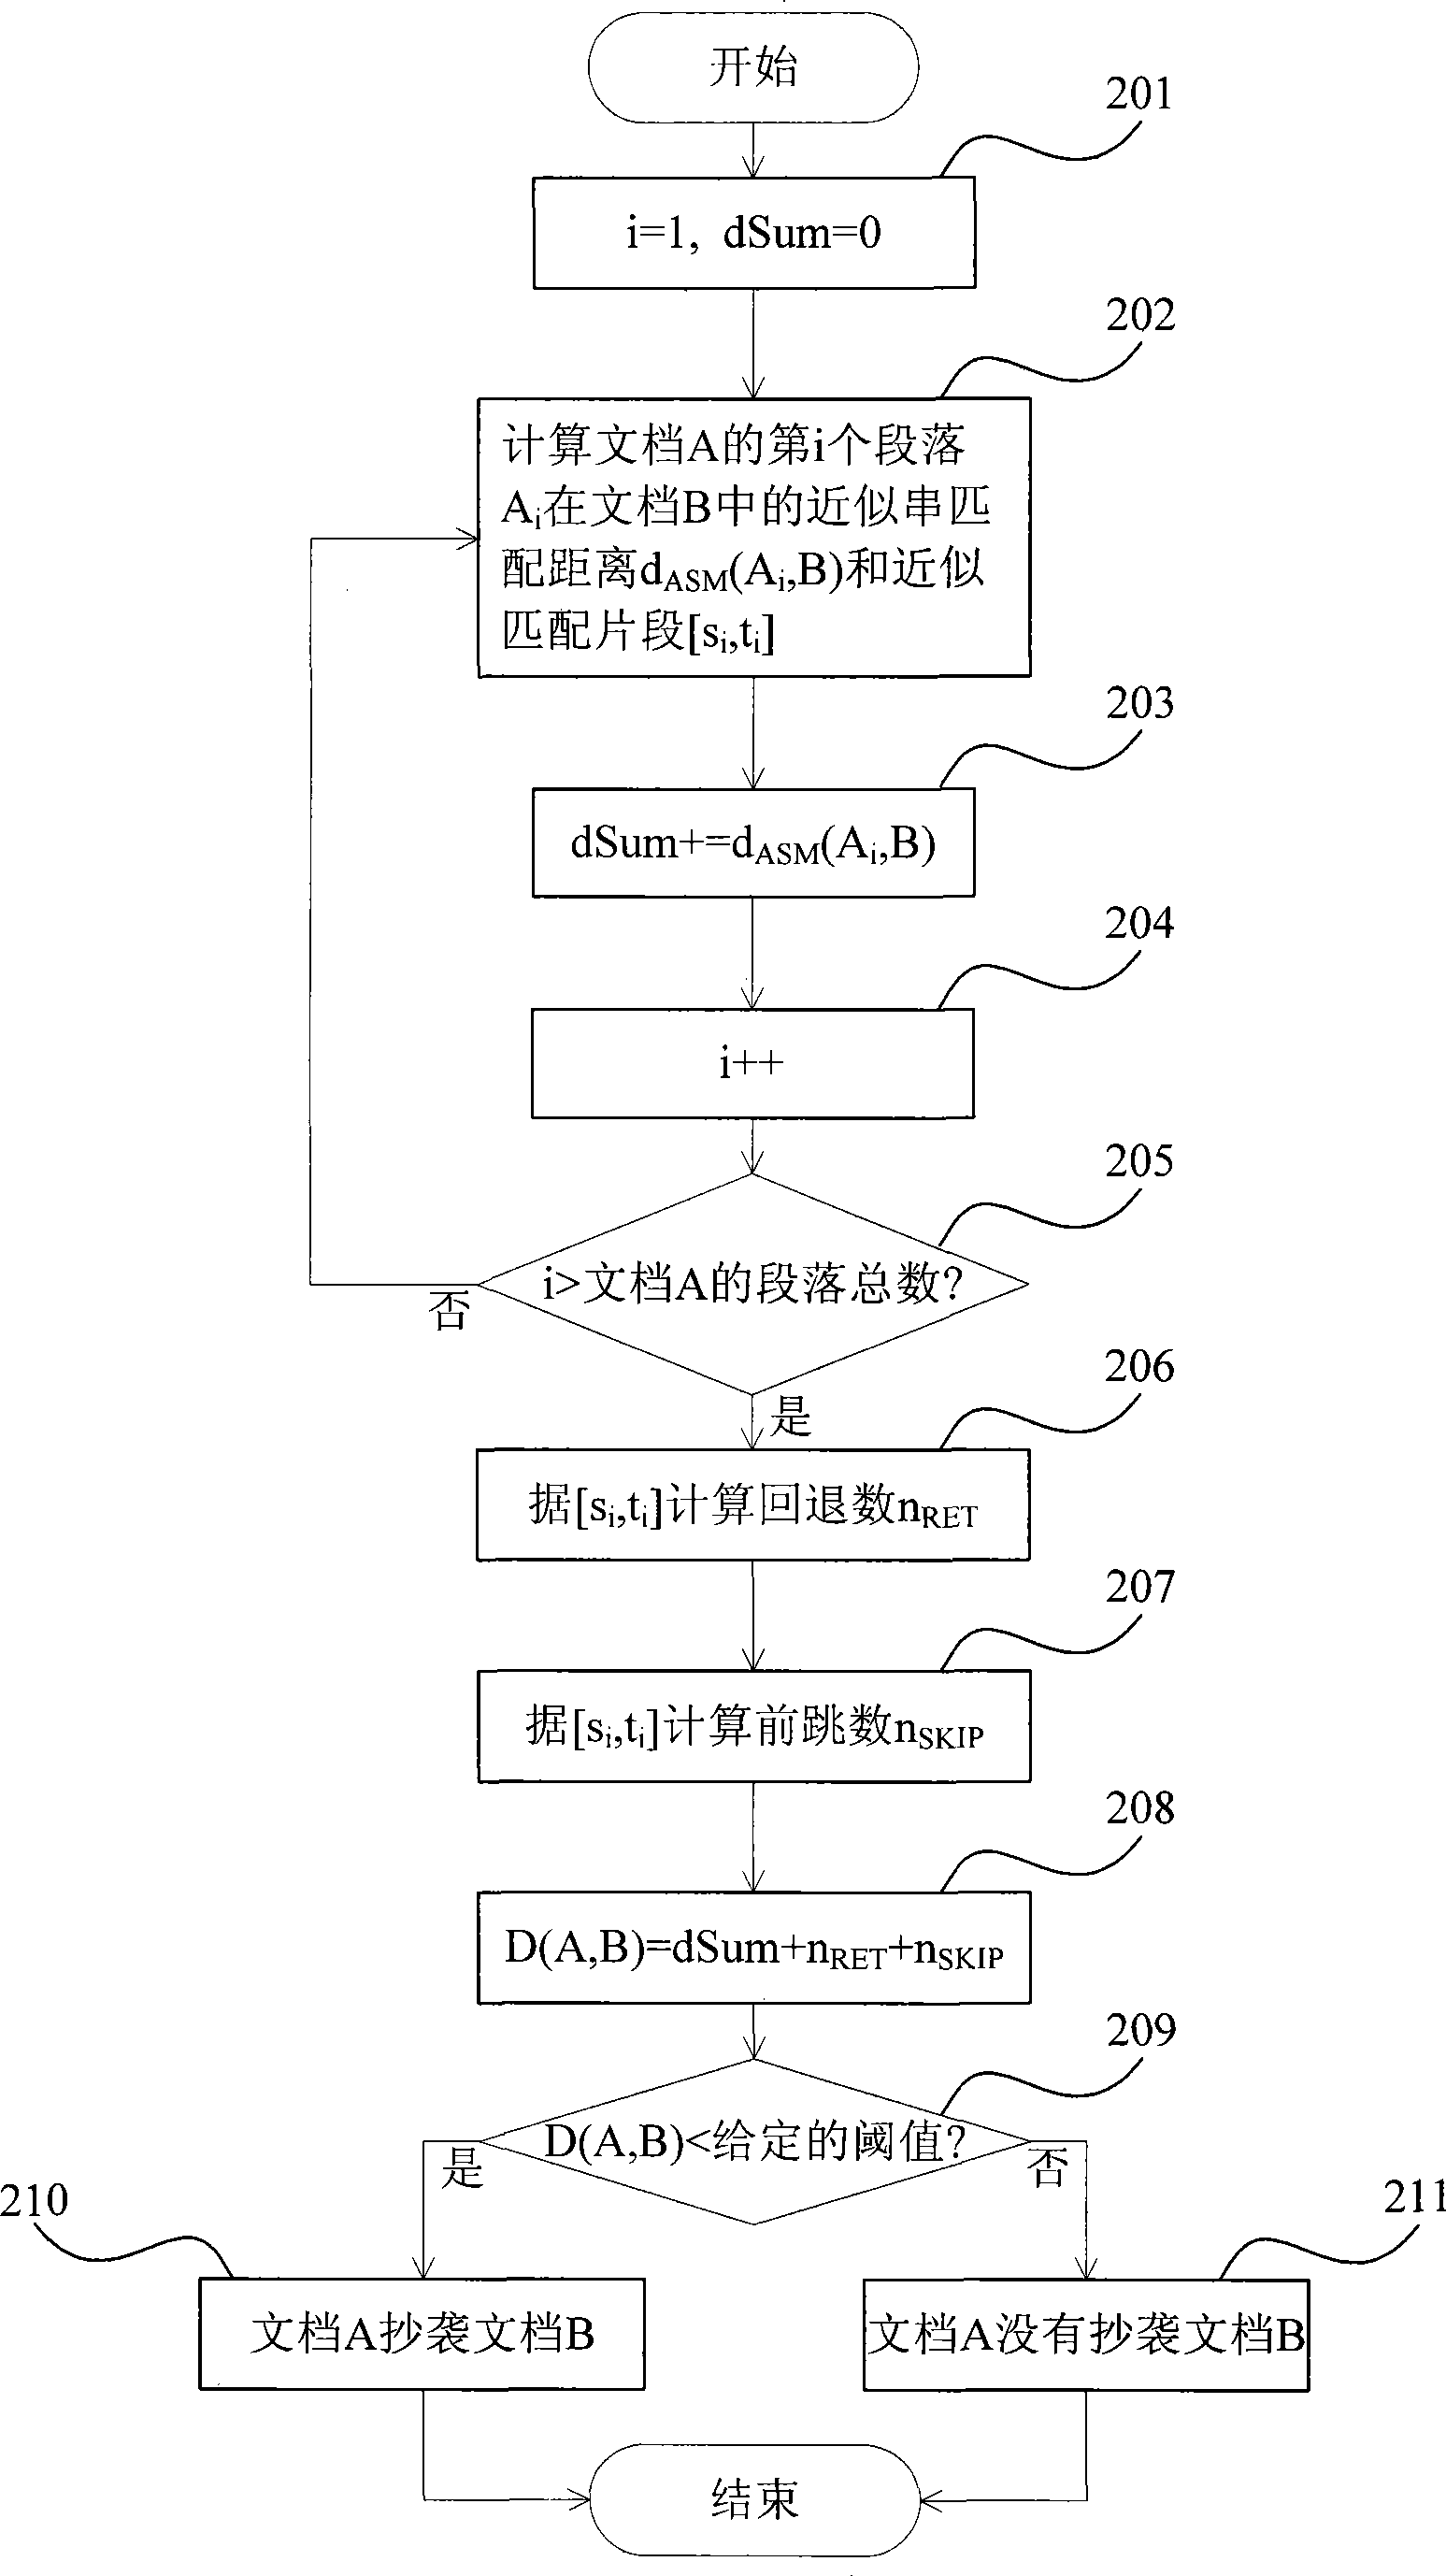 Electronic text document plagiarism recognition method based on similar string matching distance